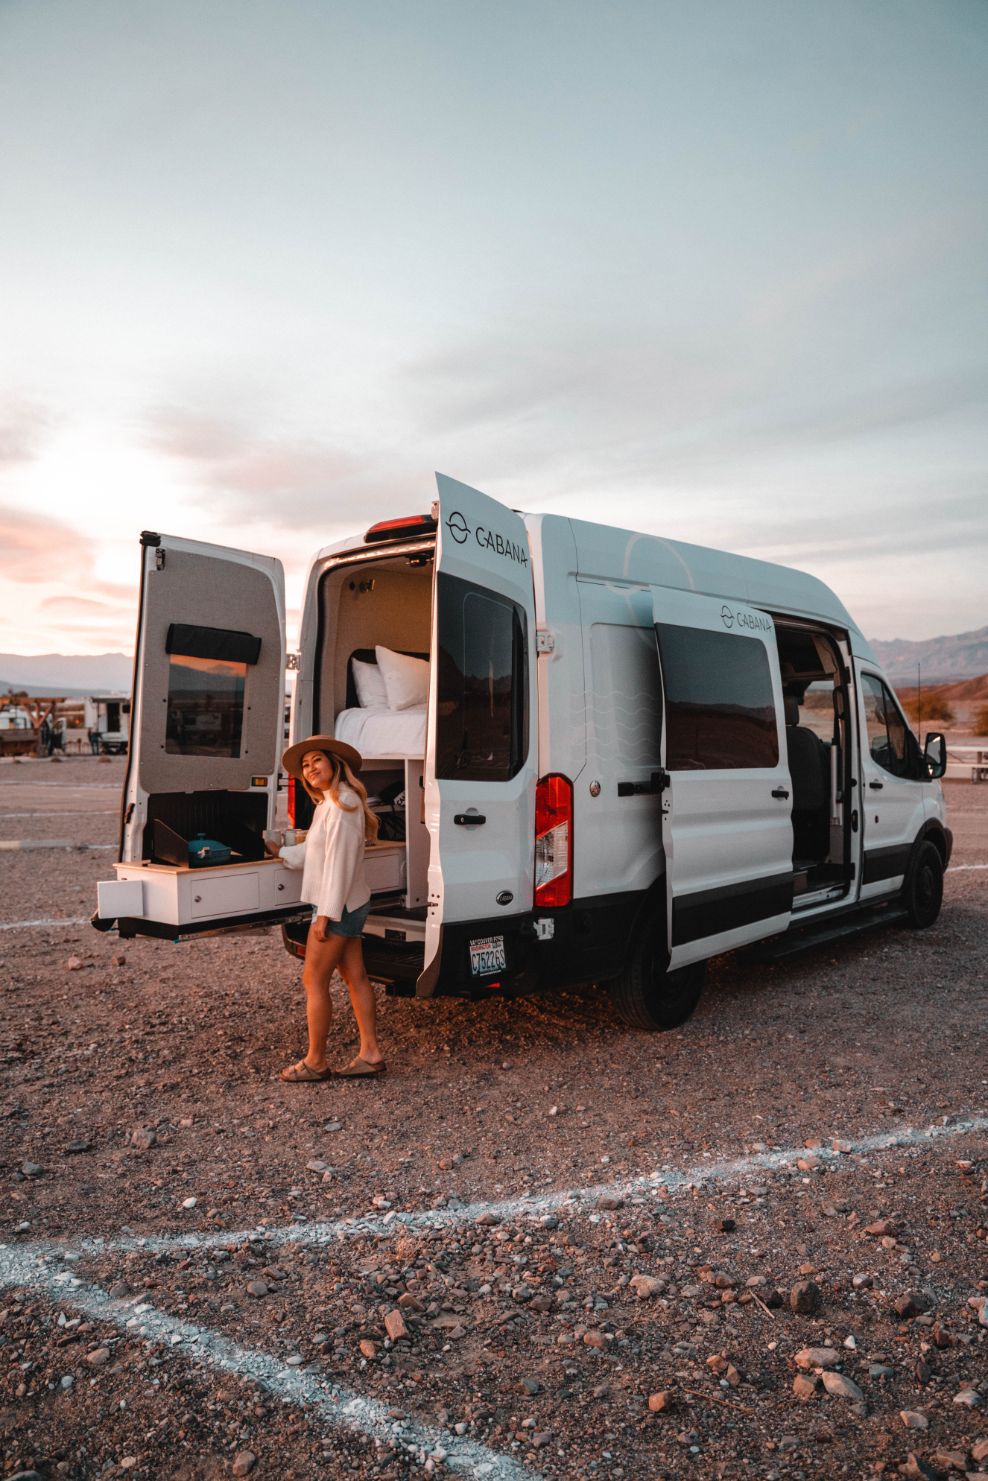 Cabana Vans: A Hotel That Travels With You